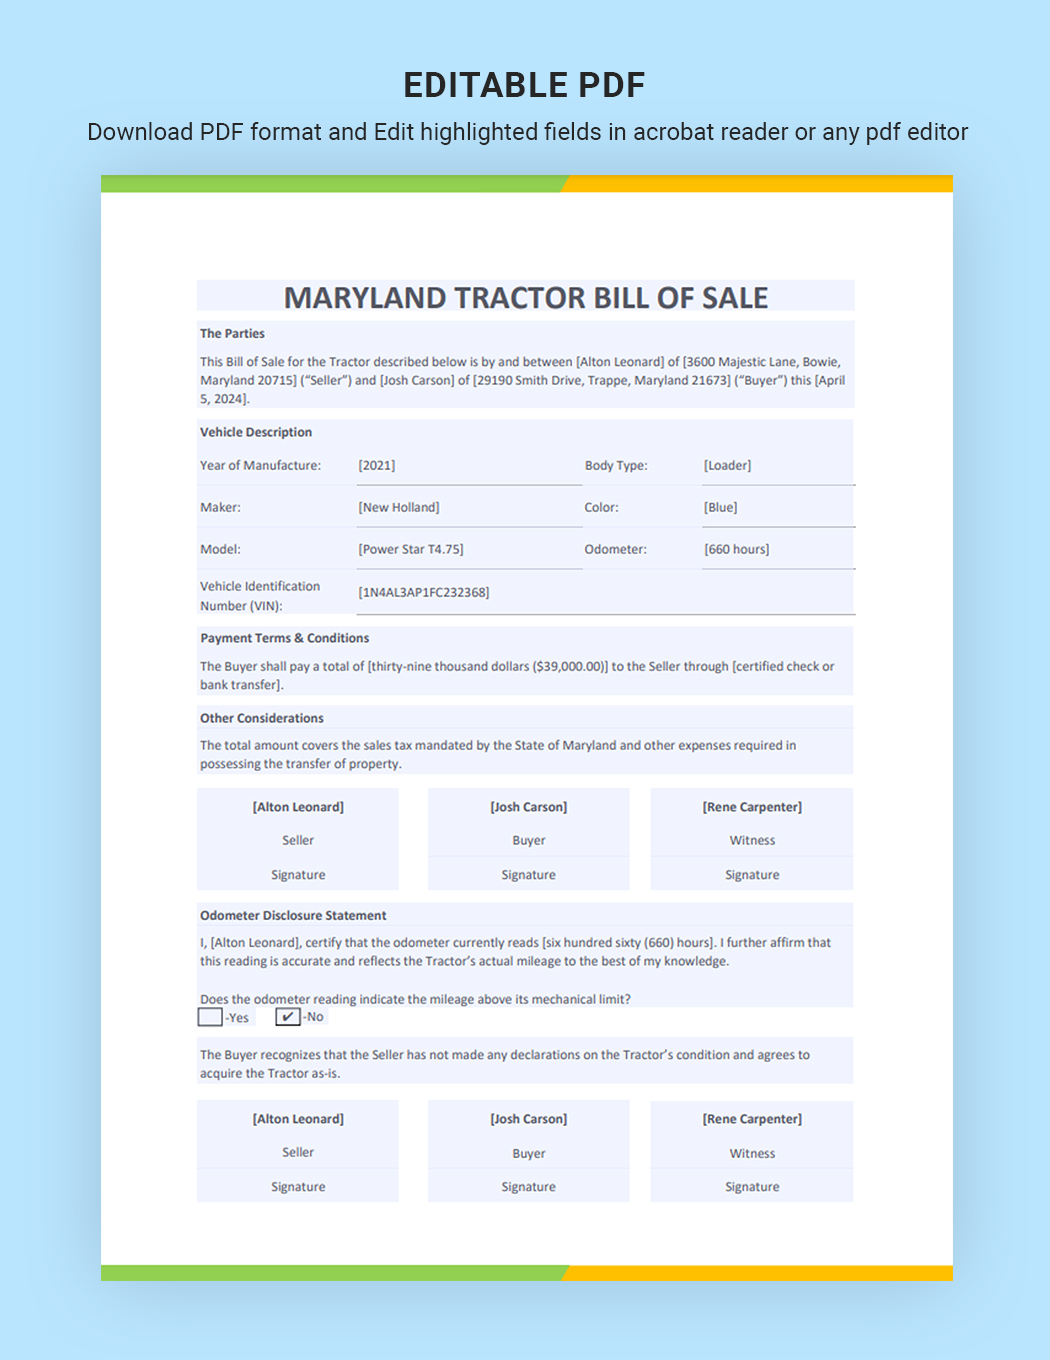 Maryland Tractor Bill of Sale Template